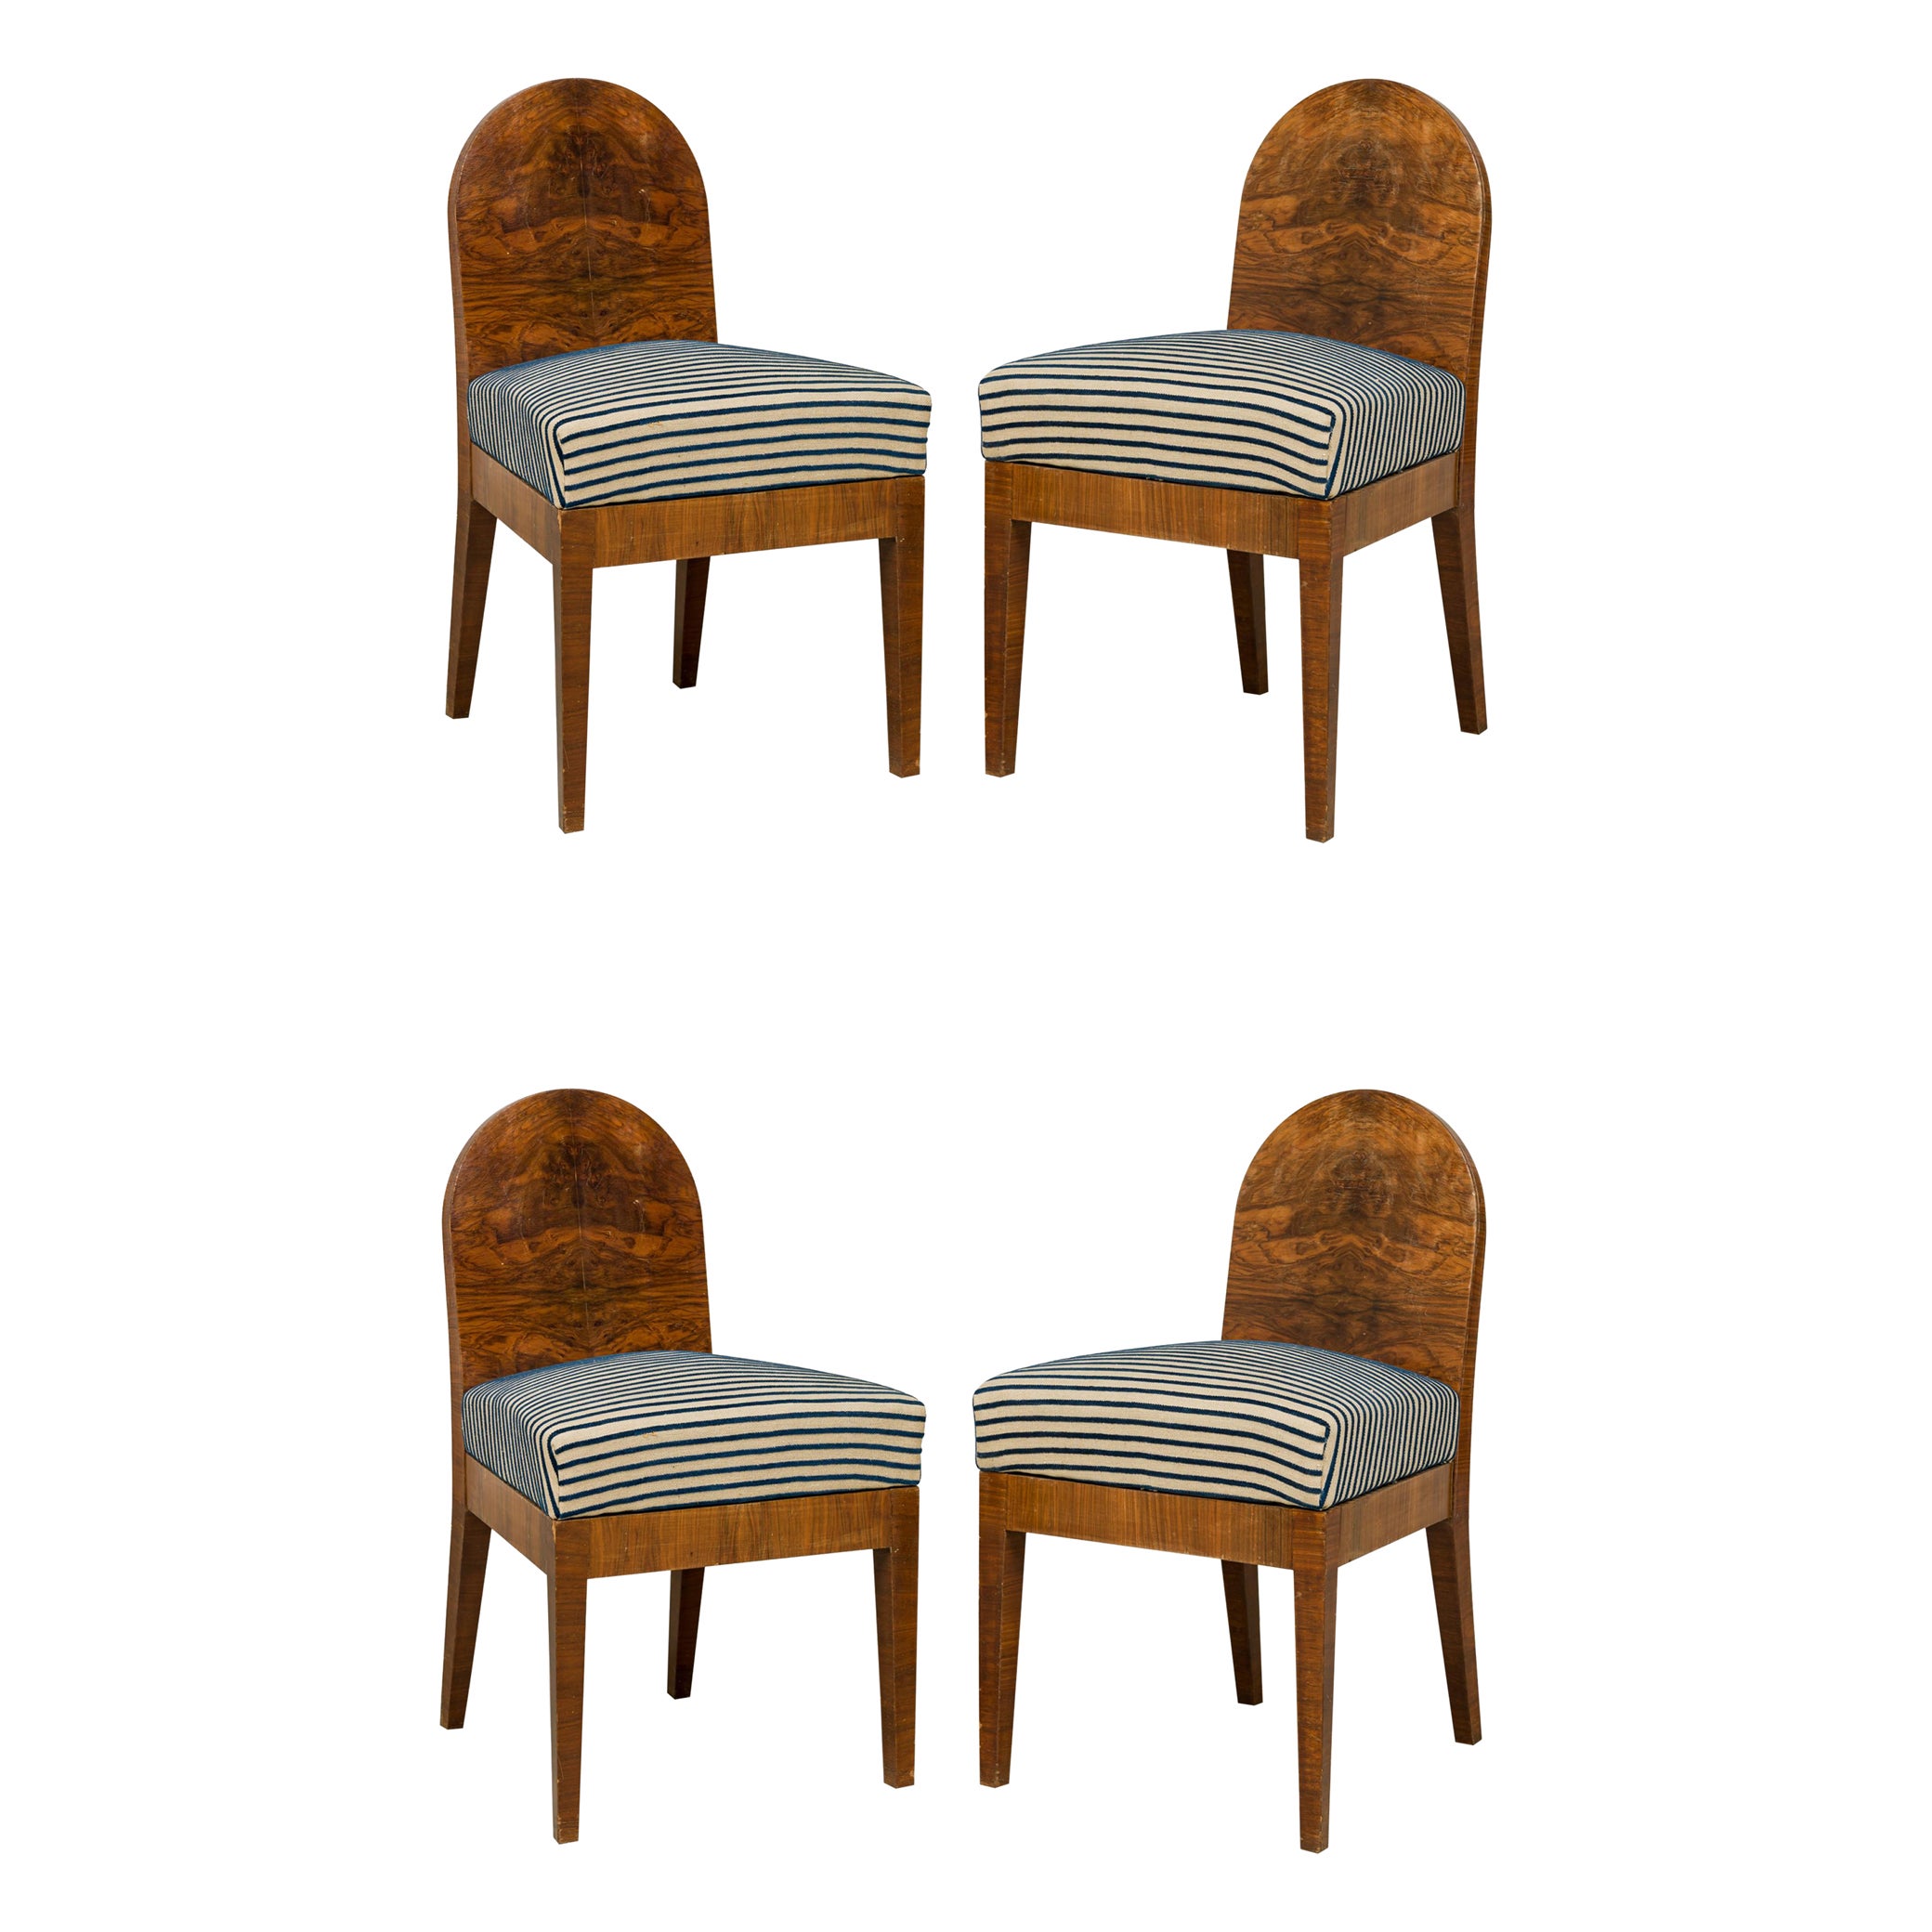 Set of 4 Austrian Burl Wood Spoon Back Stripe Upholstered Side Chairs